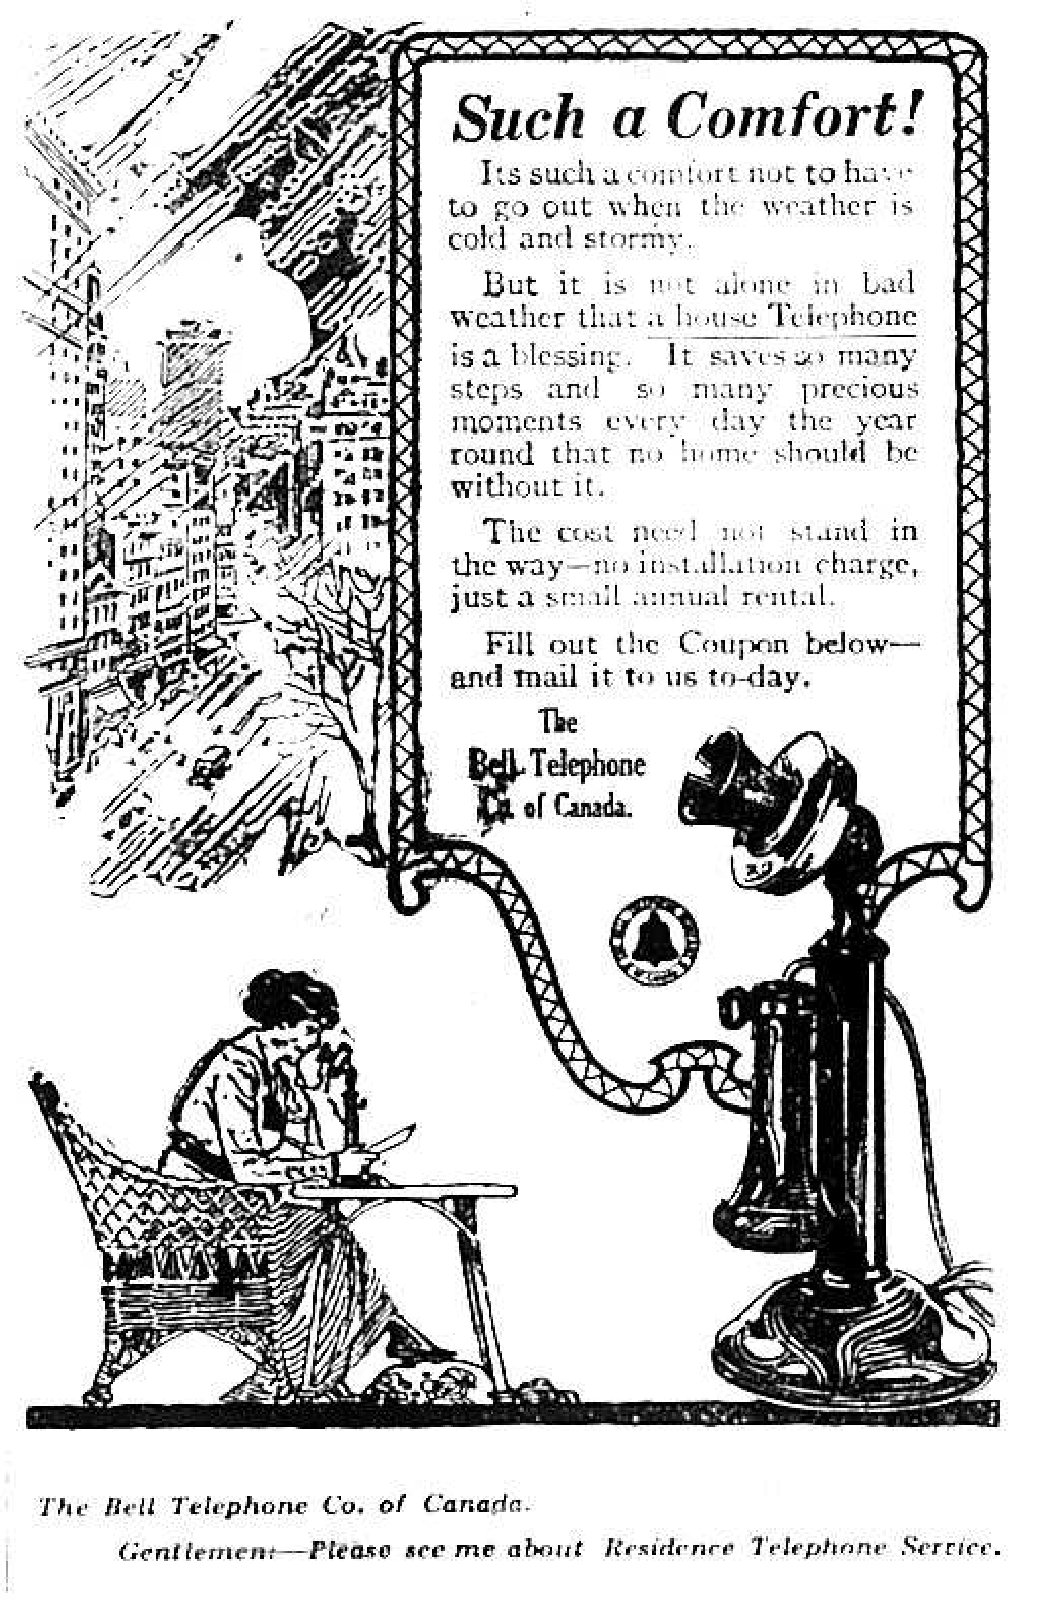 The Bell Telephone Company of Canada Advertisement, 1916